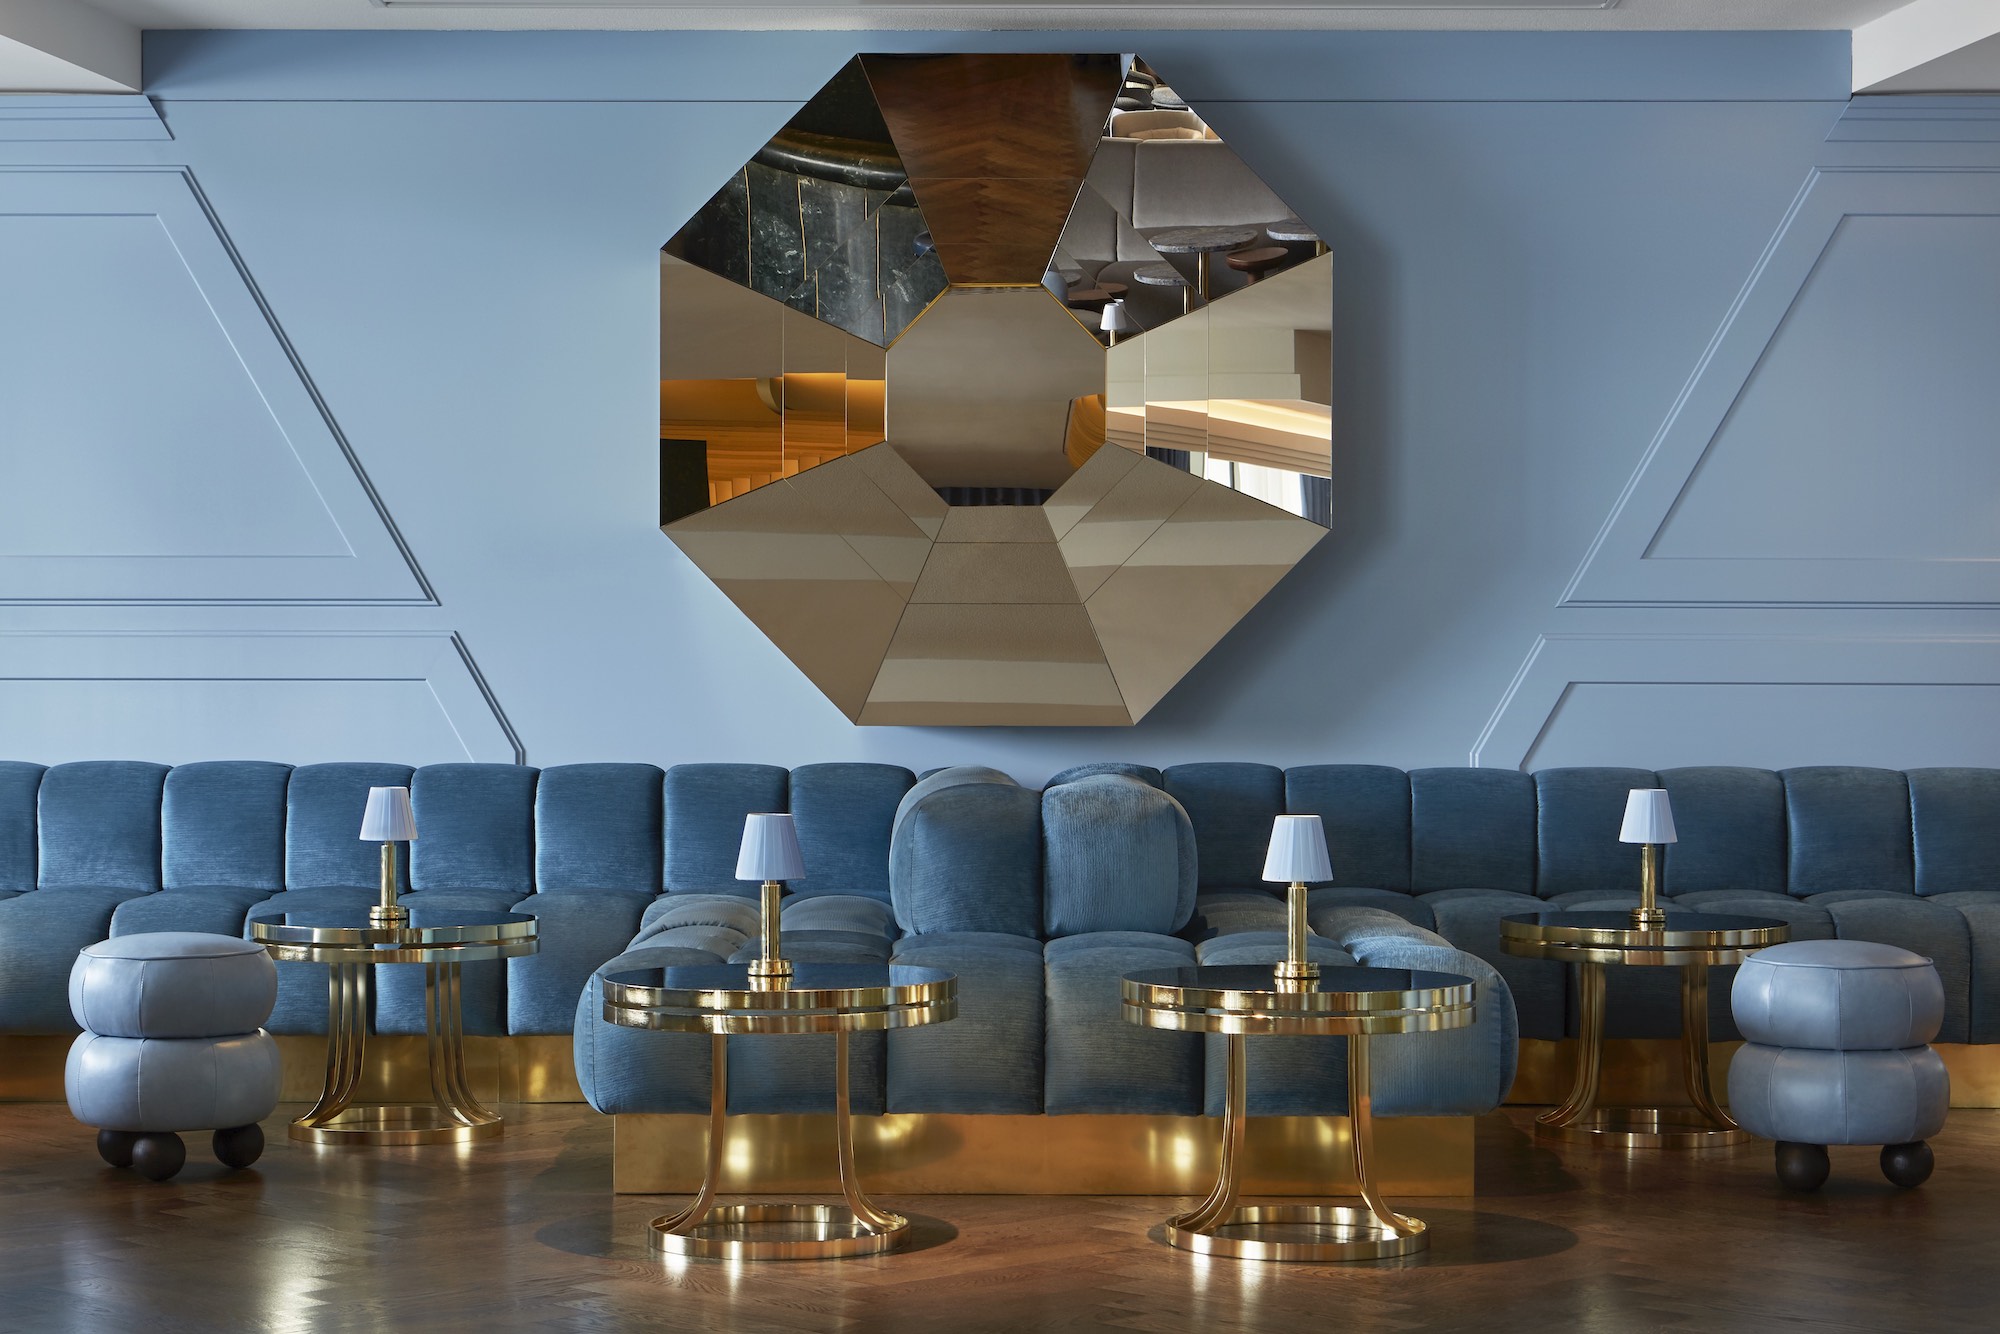 Art Deco lines and powder blue reference the golden age of transatlantic liners at Sea Containers by hotel designer Jacu Strauss in Effect Magazine